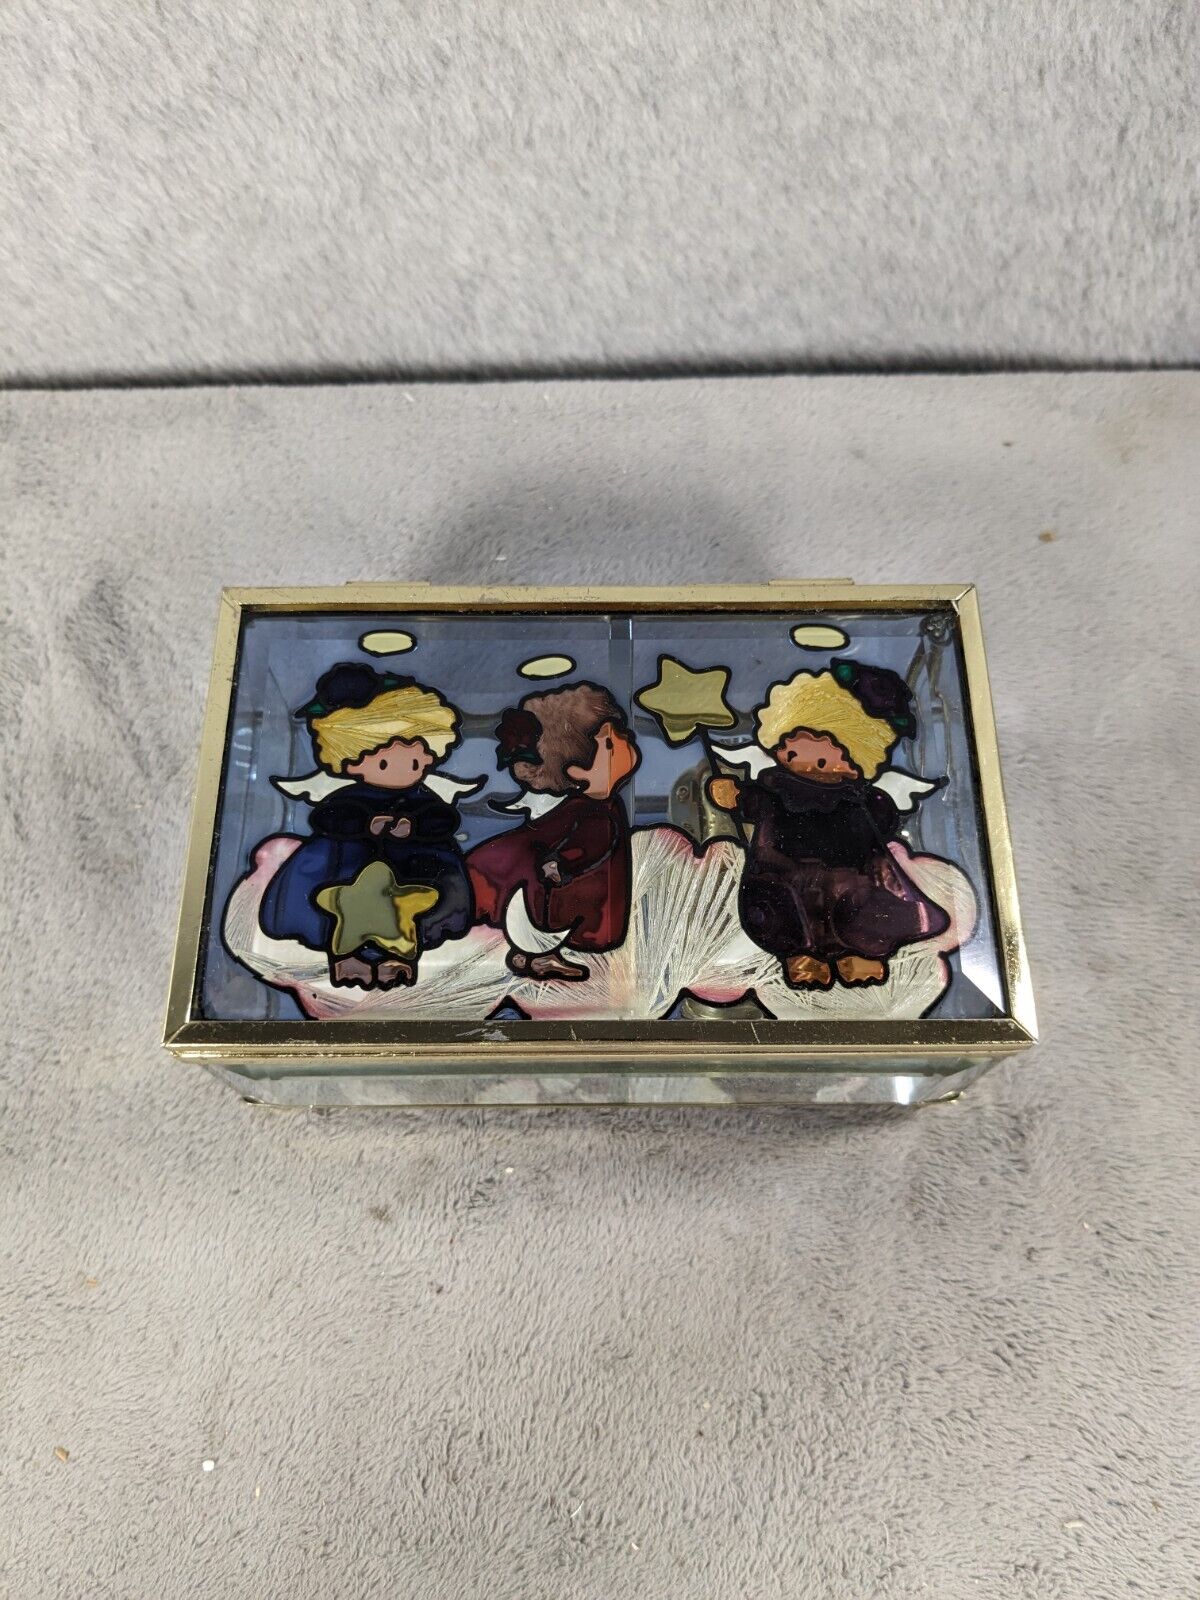 Vintage Small Glass Angel Trinket Music Box Stained Glass Look With 3 Angels